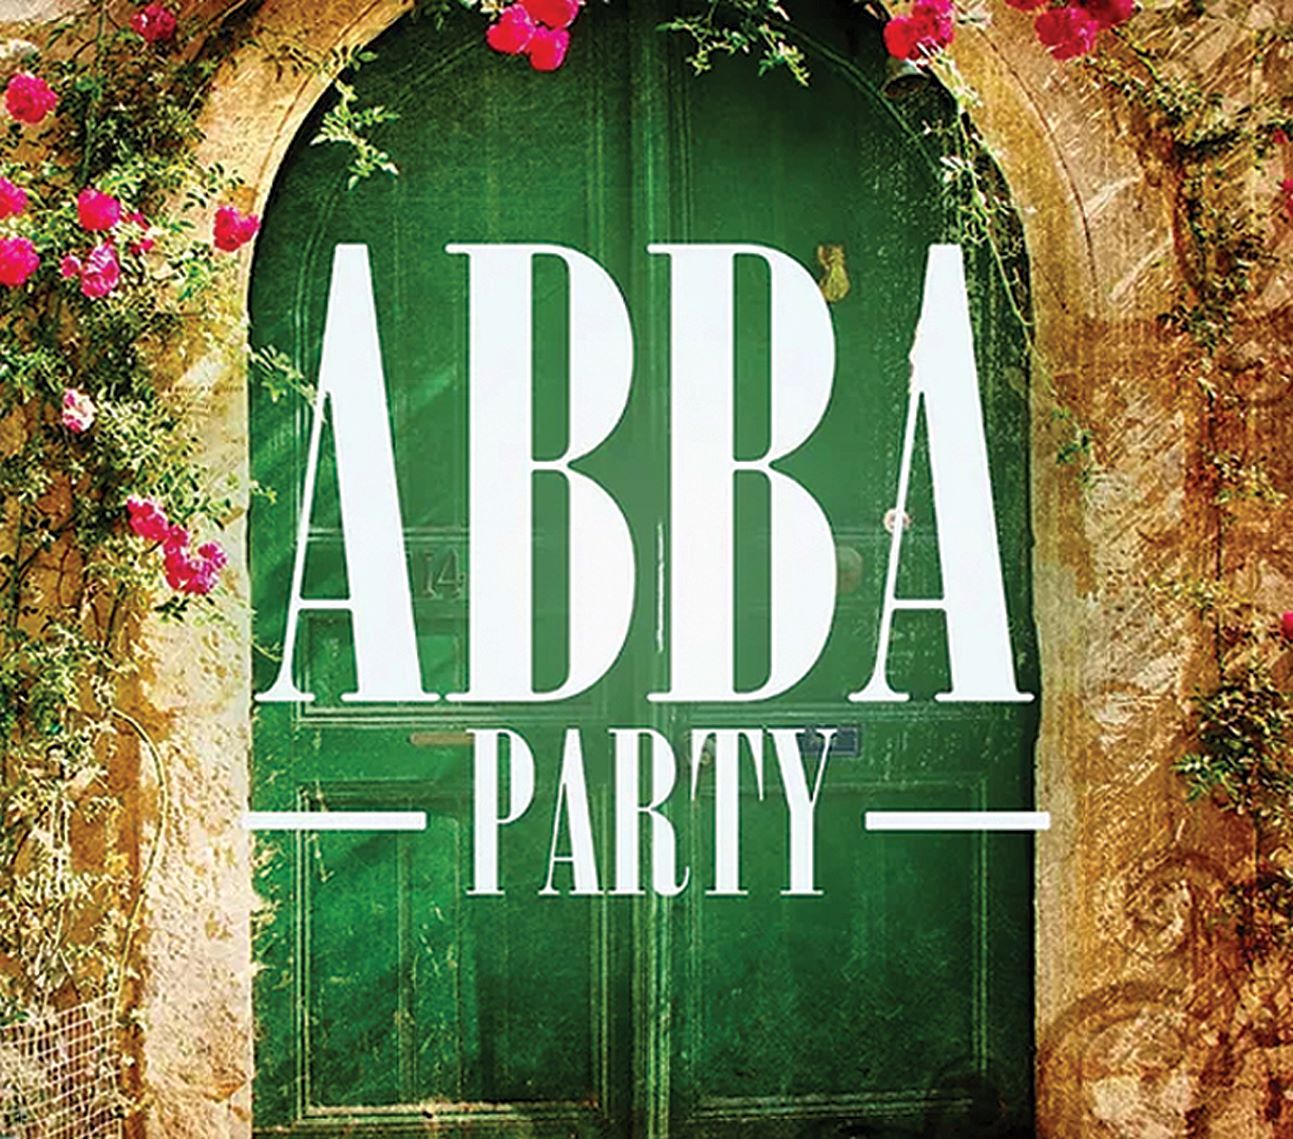 ABBA PARTY - YEADON TOWN HALL DINNER SHOW